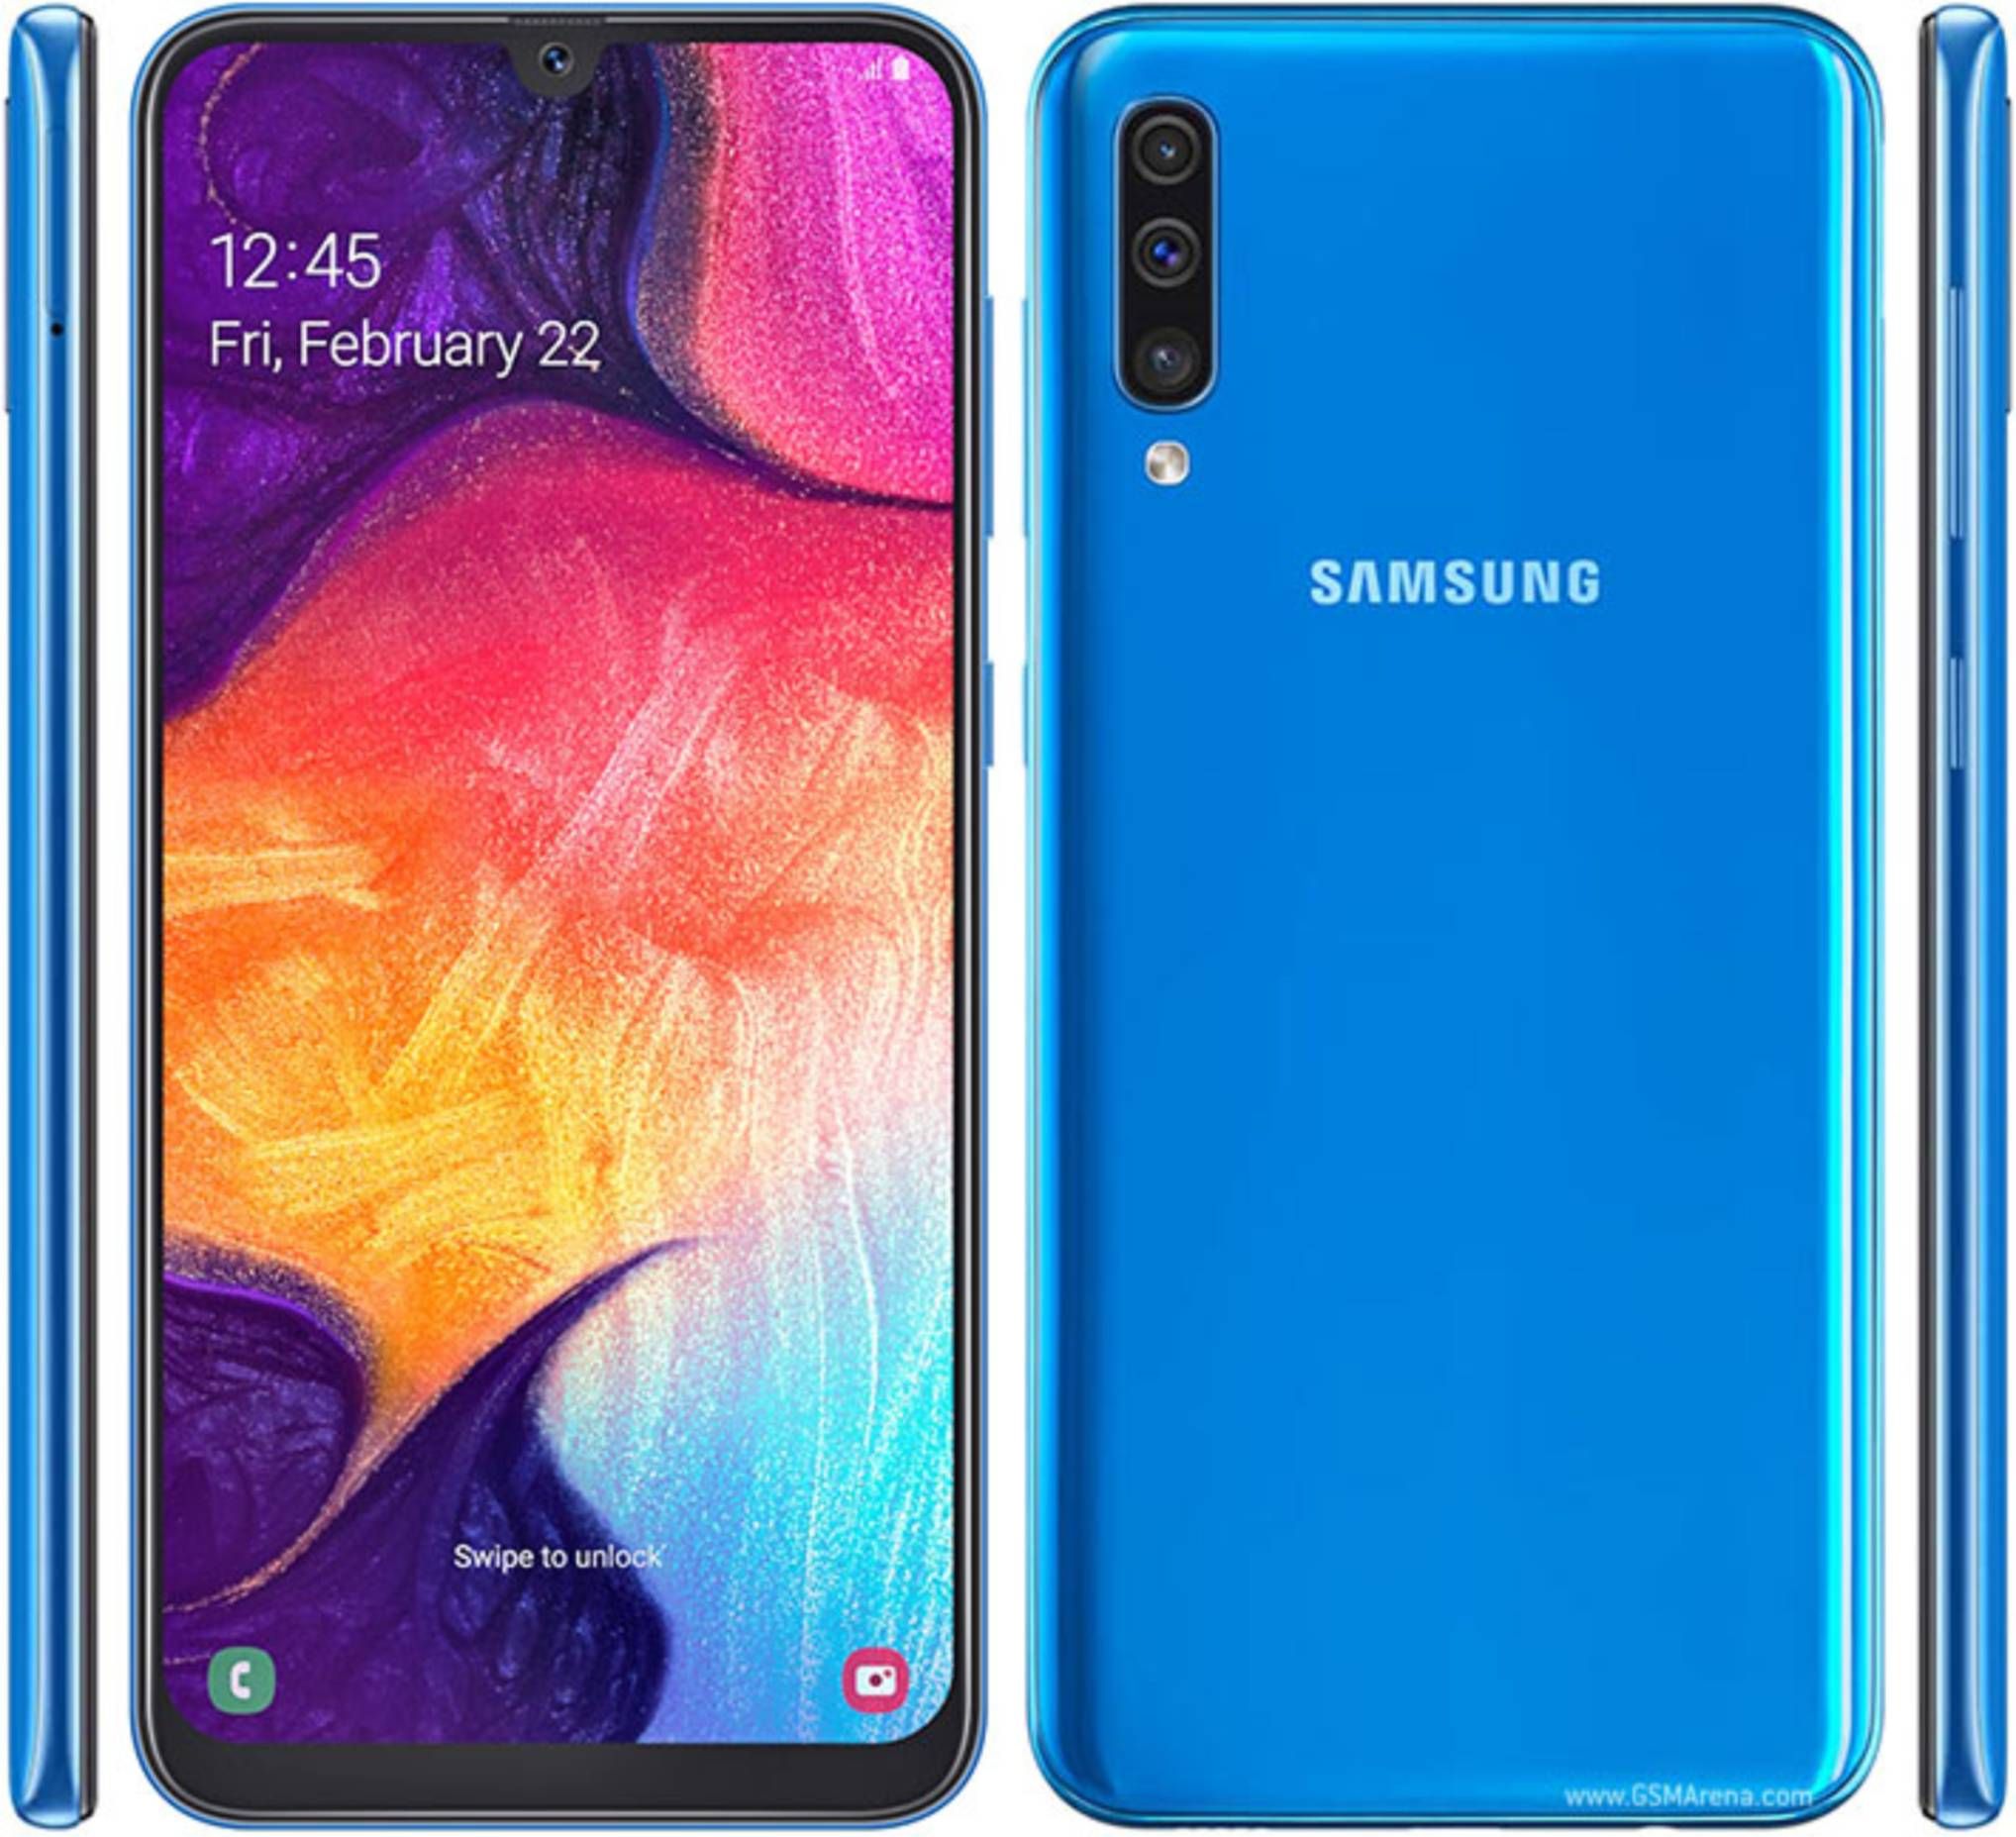 Samsung Galaxy A50 Specifications and Price in Kenya